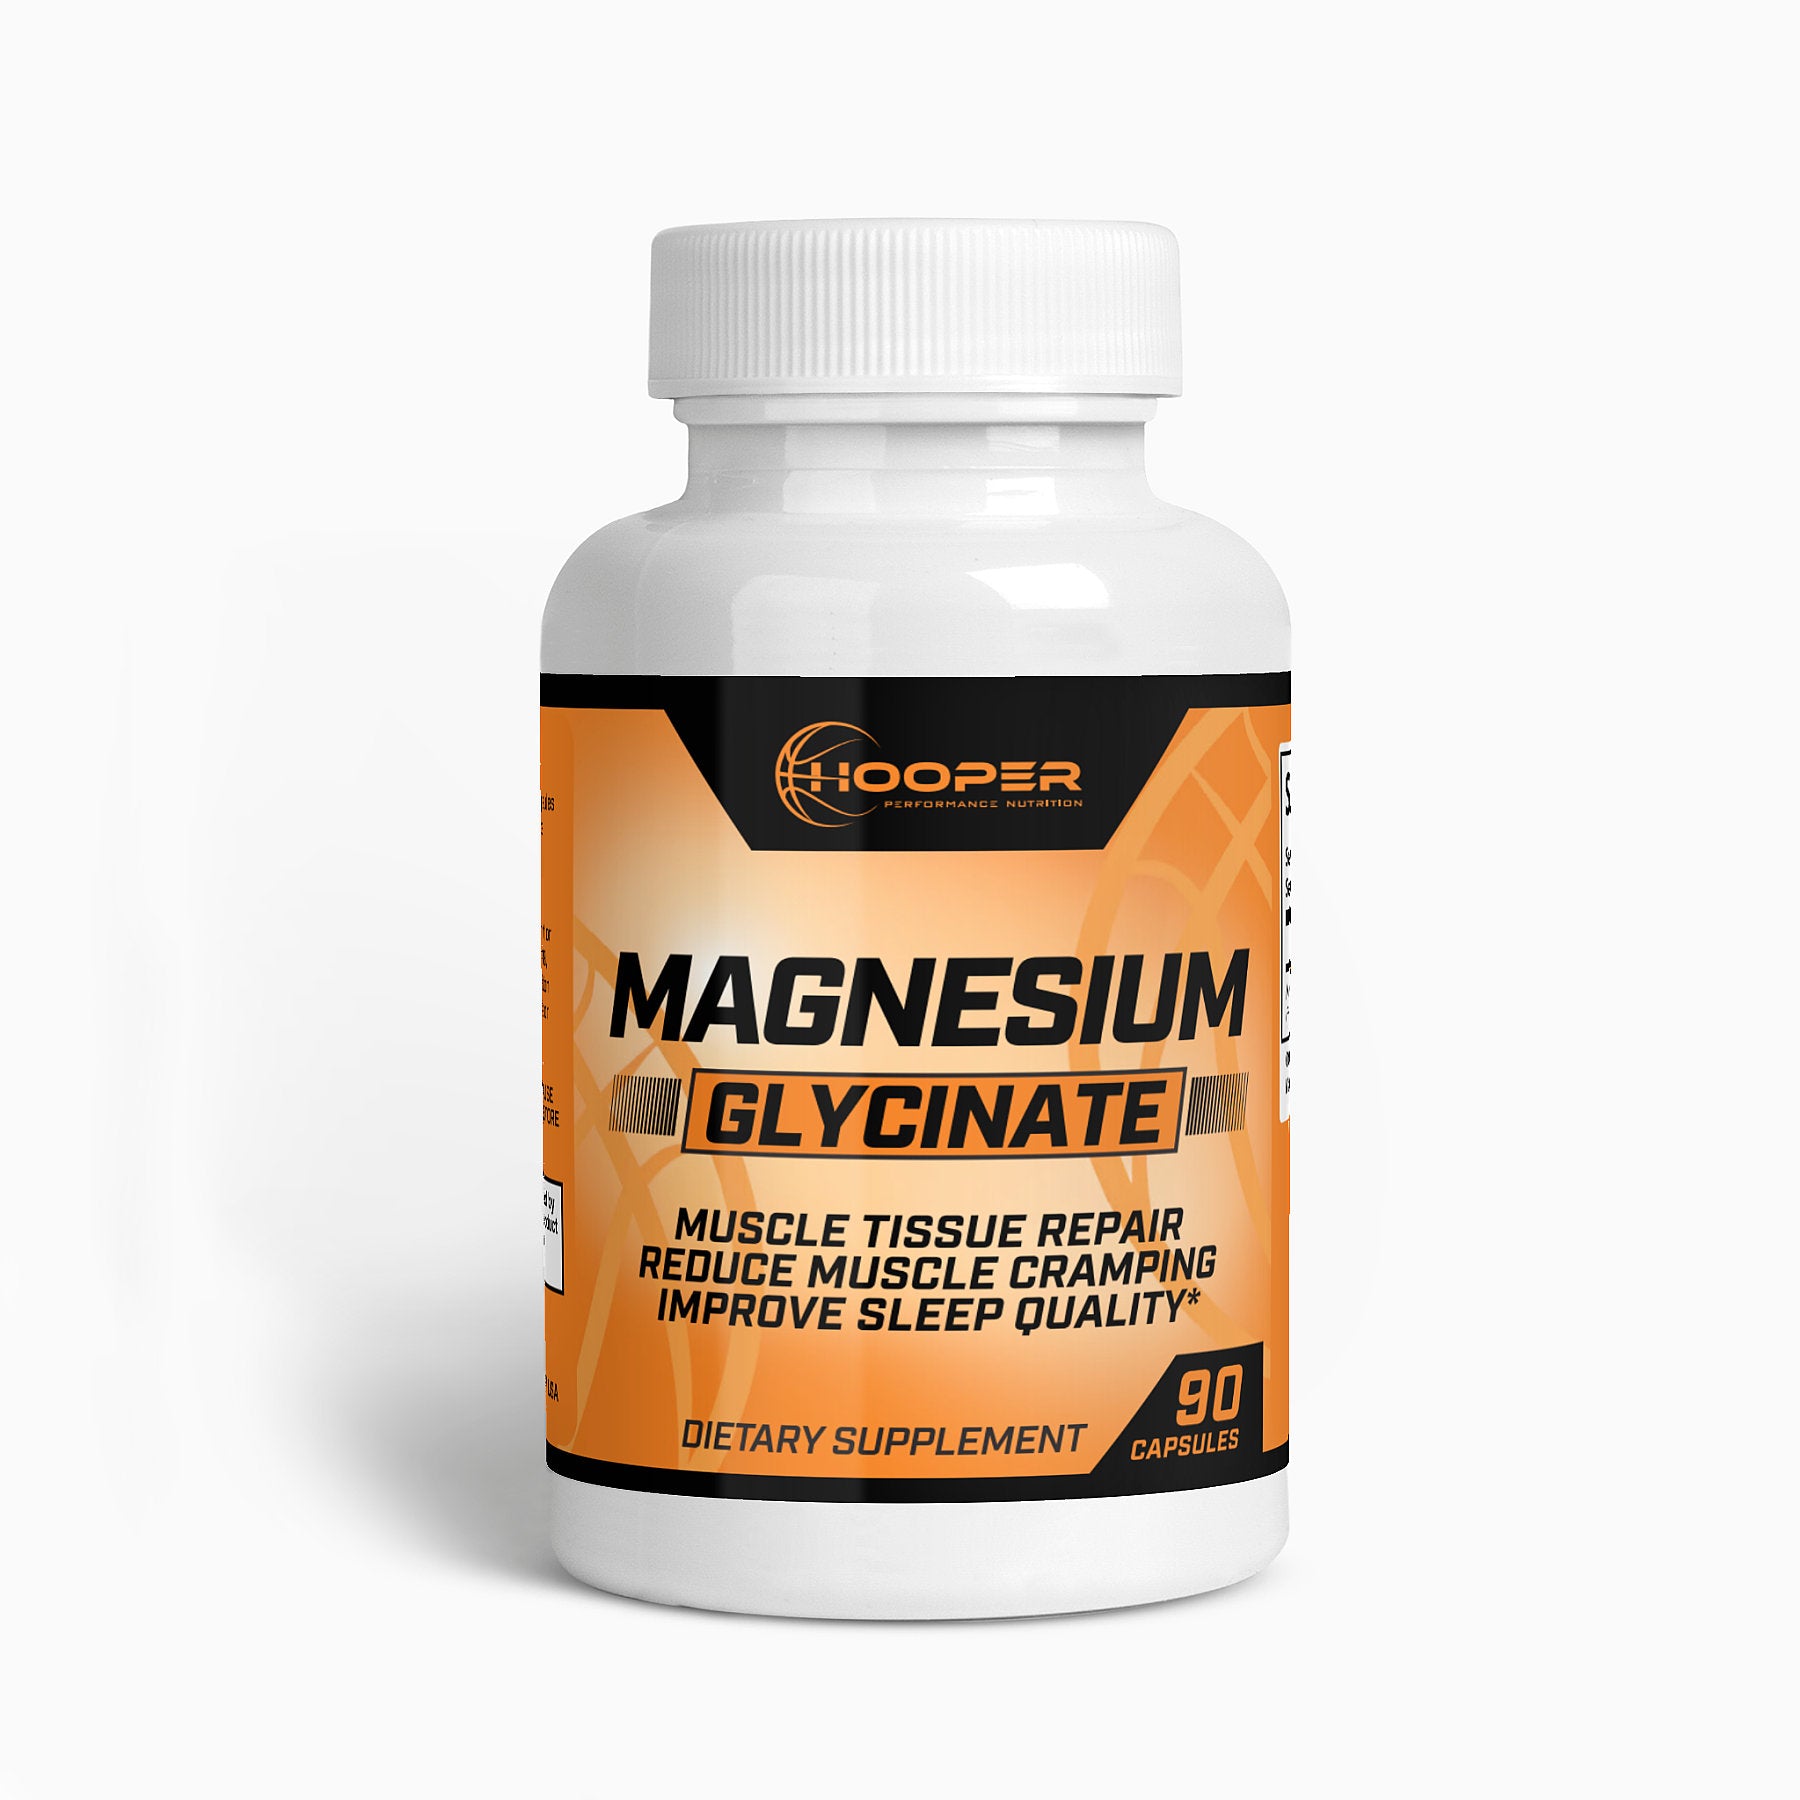 Bottle of Magnesium Glycinate dietary supplement with 90 capsules.